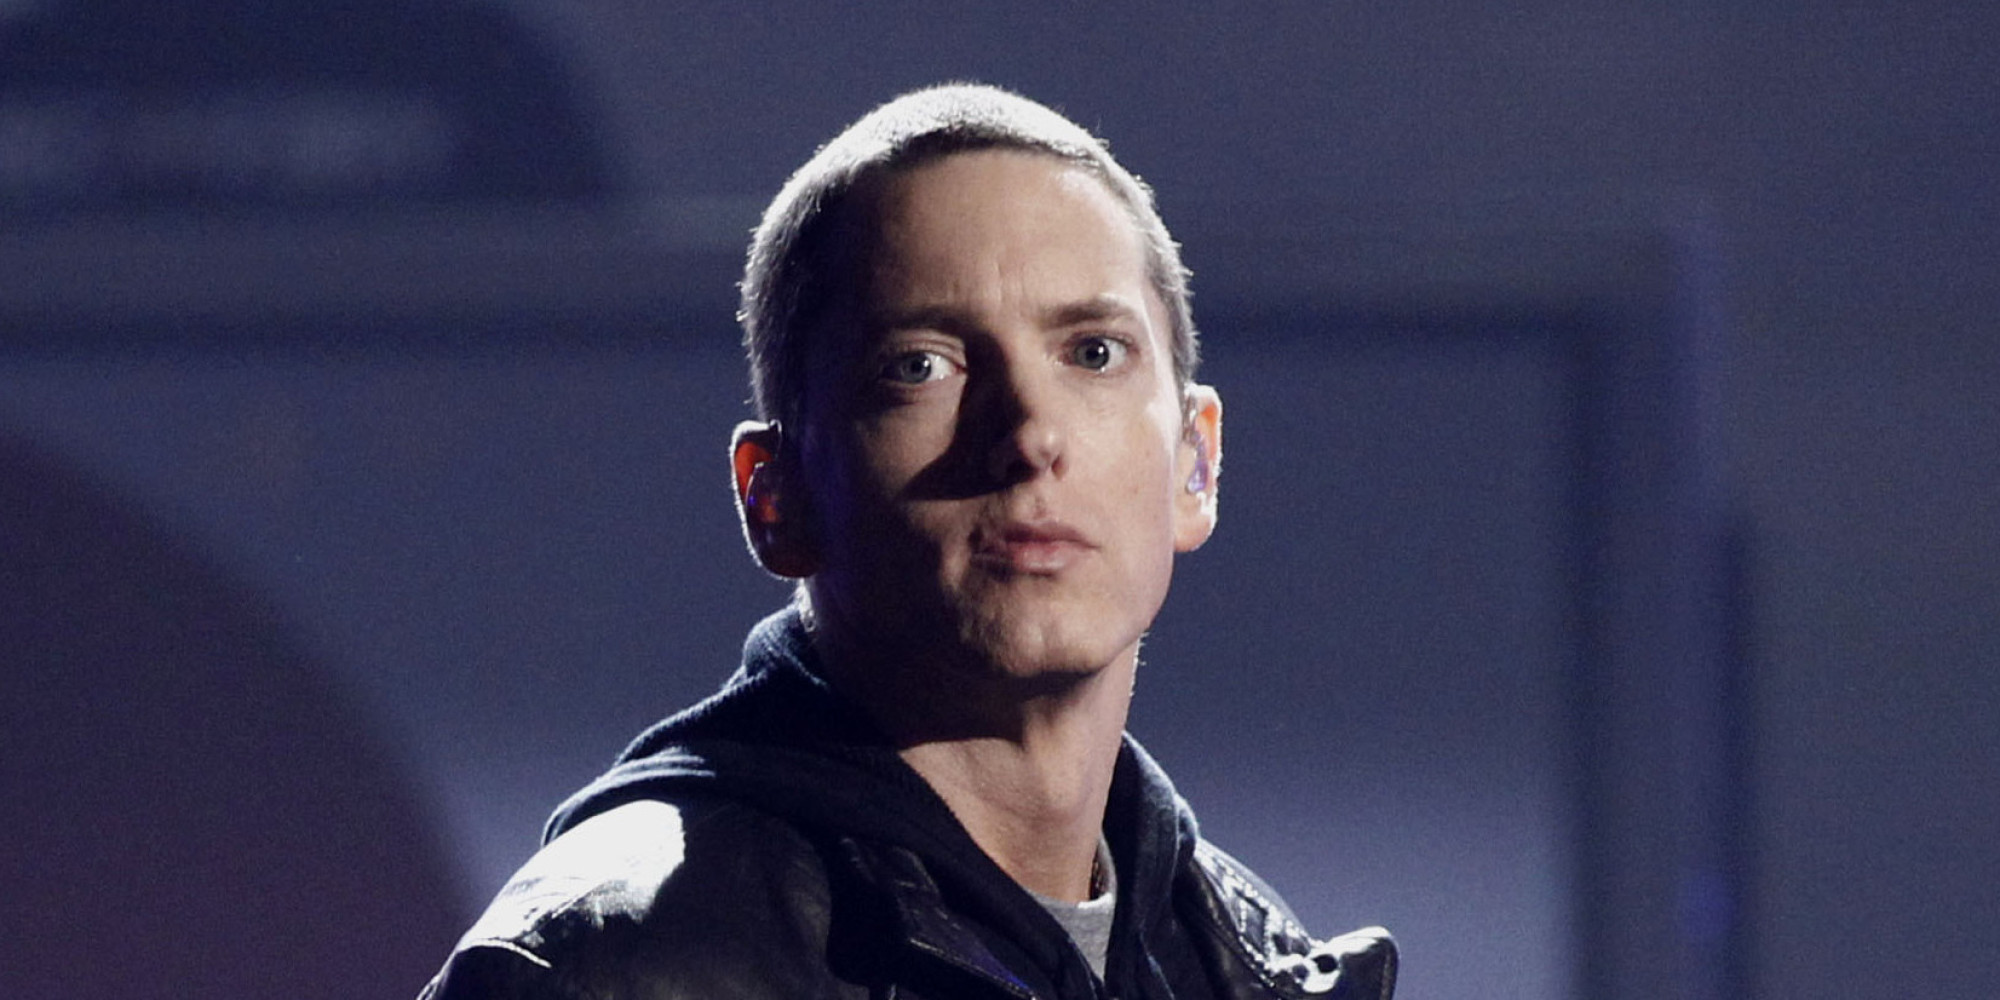 Eminem Wallpapers Images Photos Pictures Backgrounds2000 x 1000